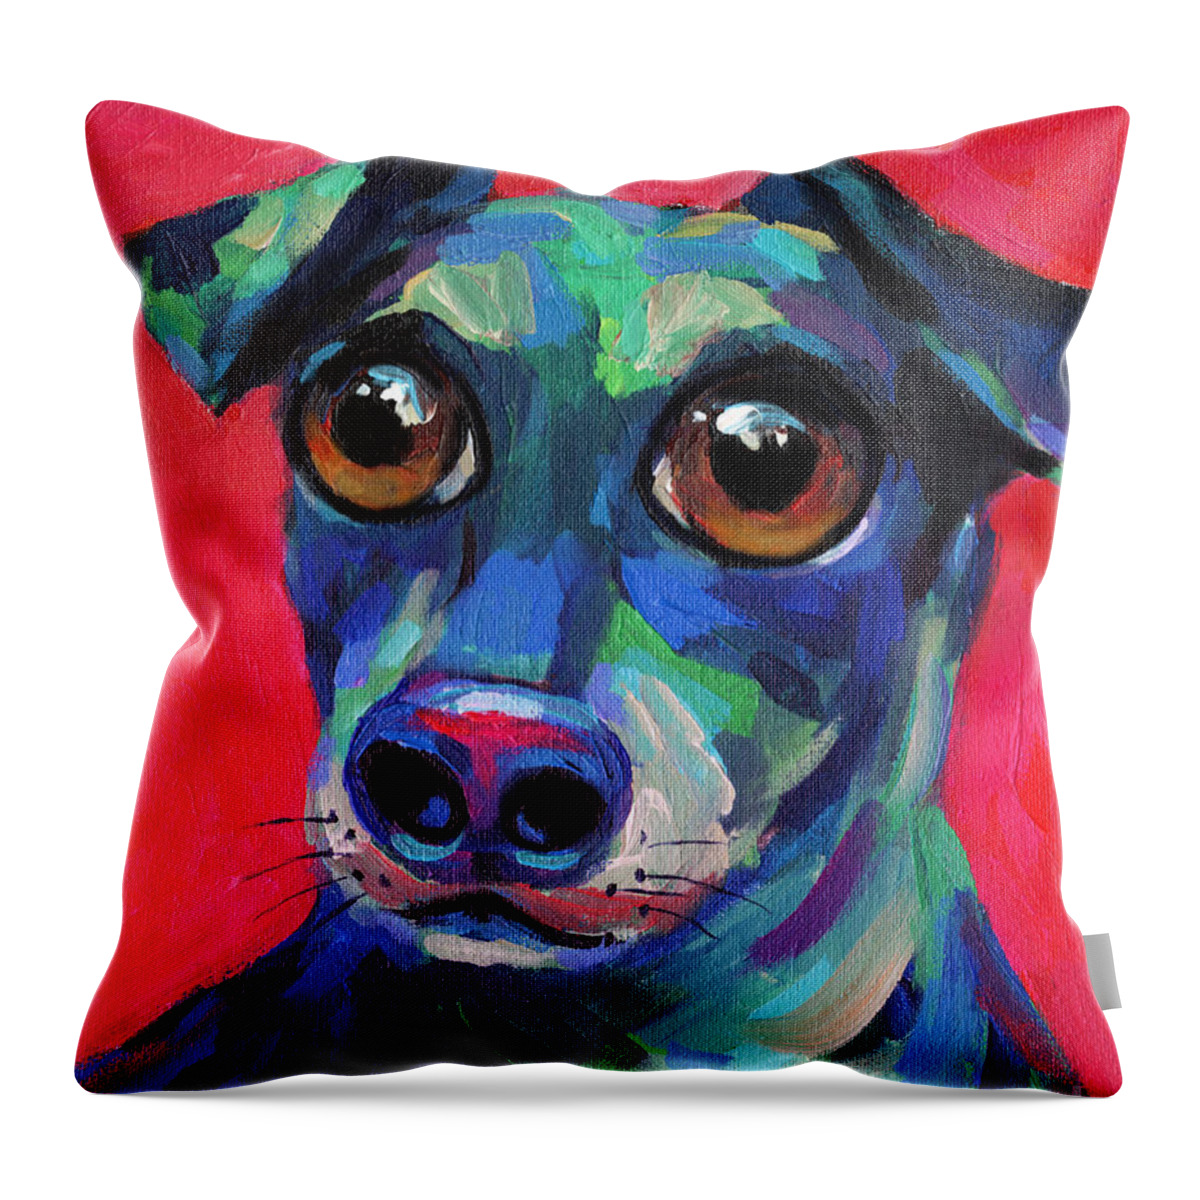 Weiner Dog Throw Pillow featuring the painting Funny dachshund weiner dog with intense eyes by Svetlana Novikova